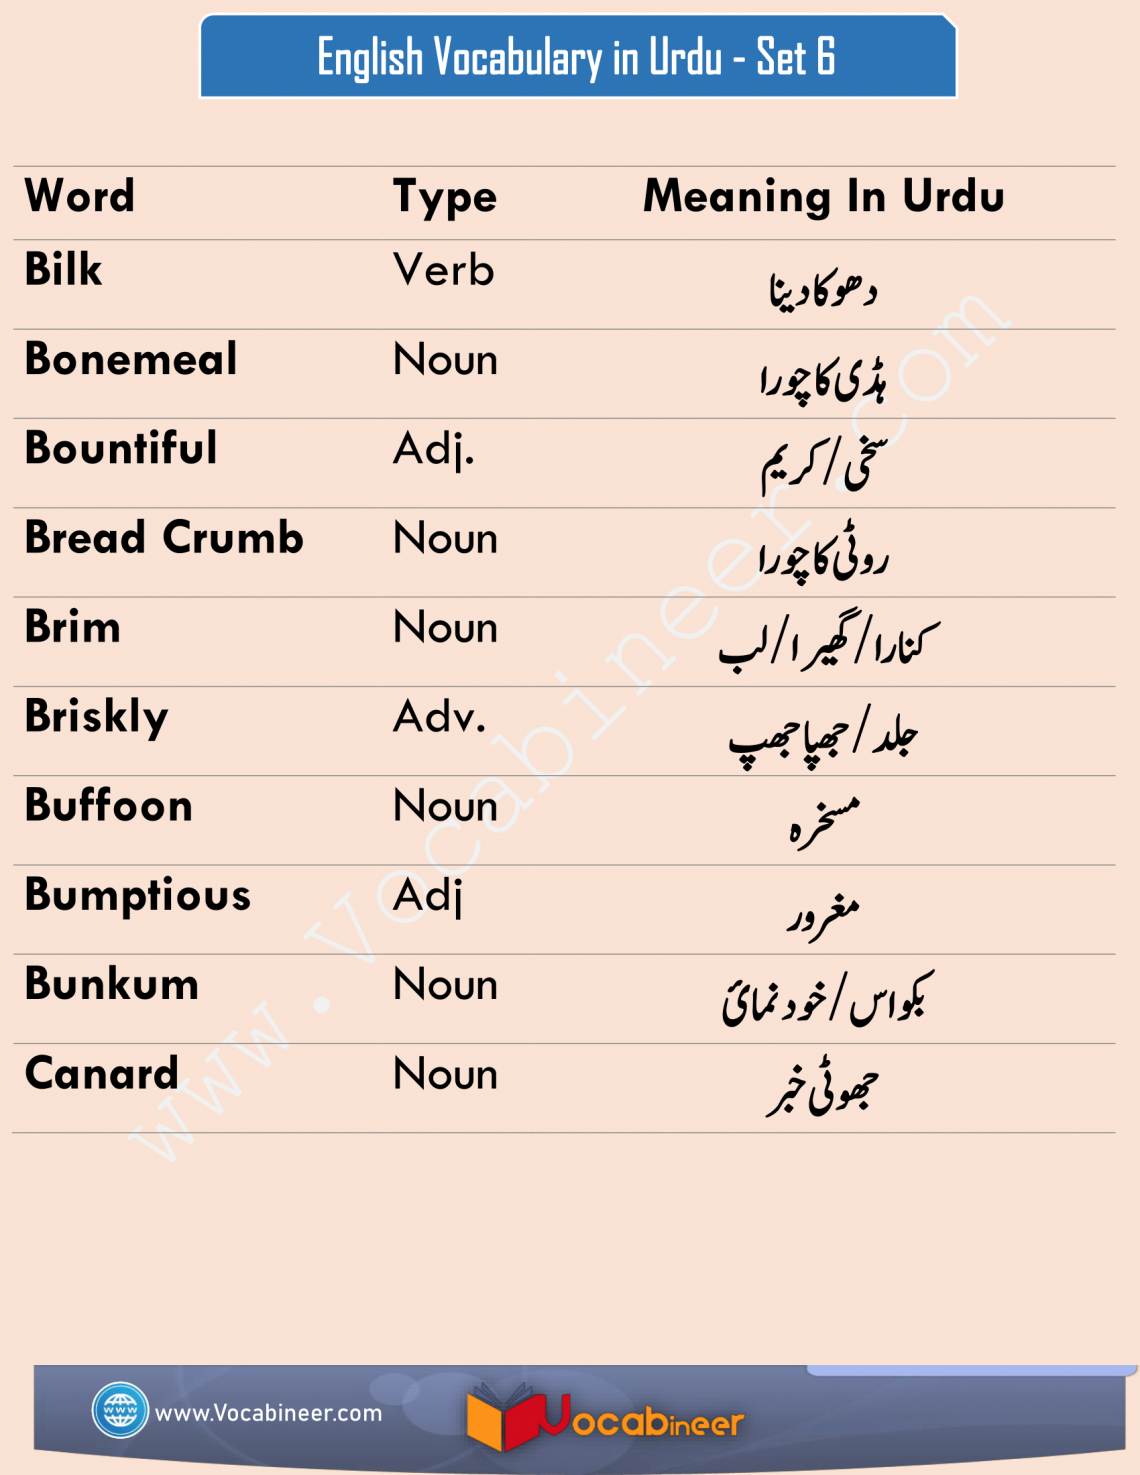 the meaning in urdu assignment